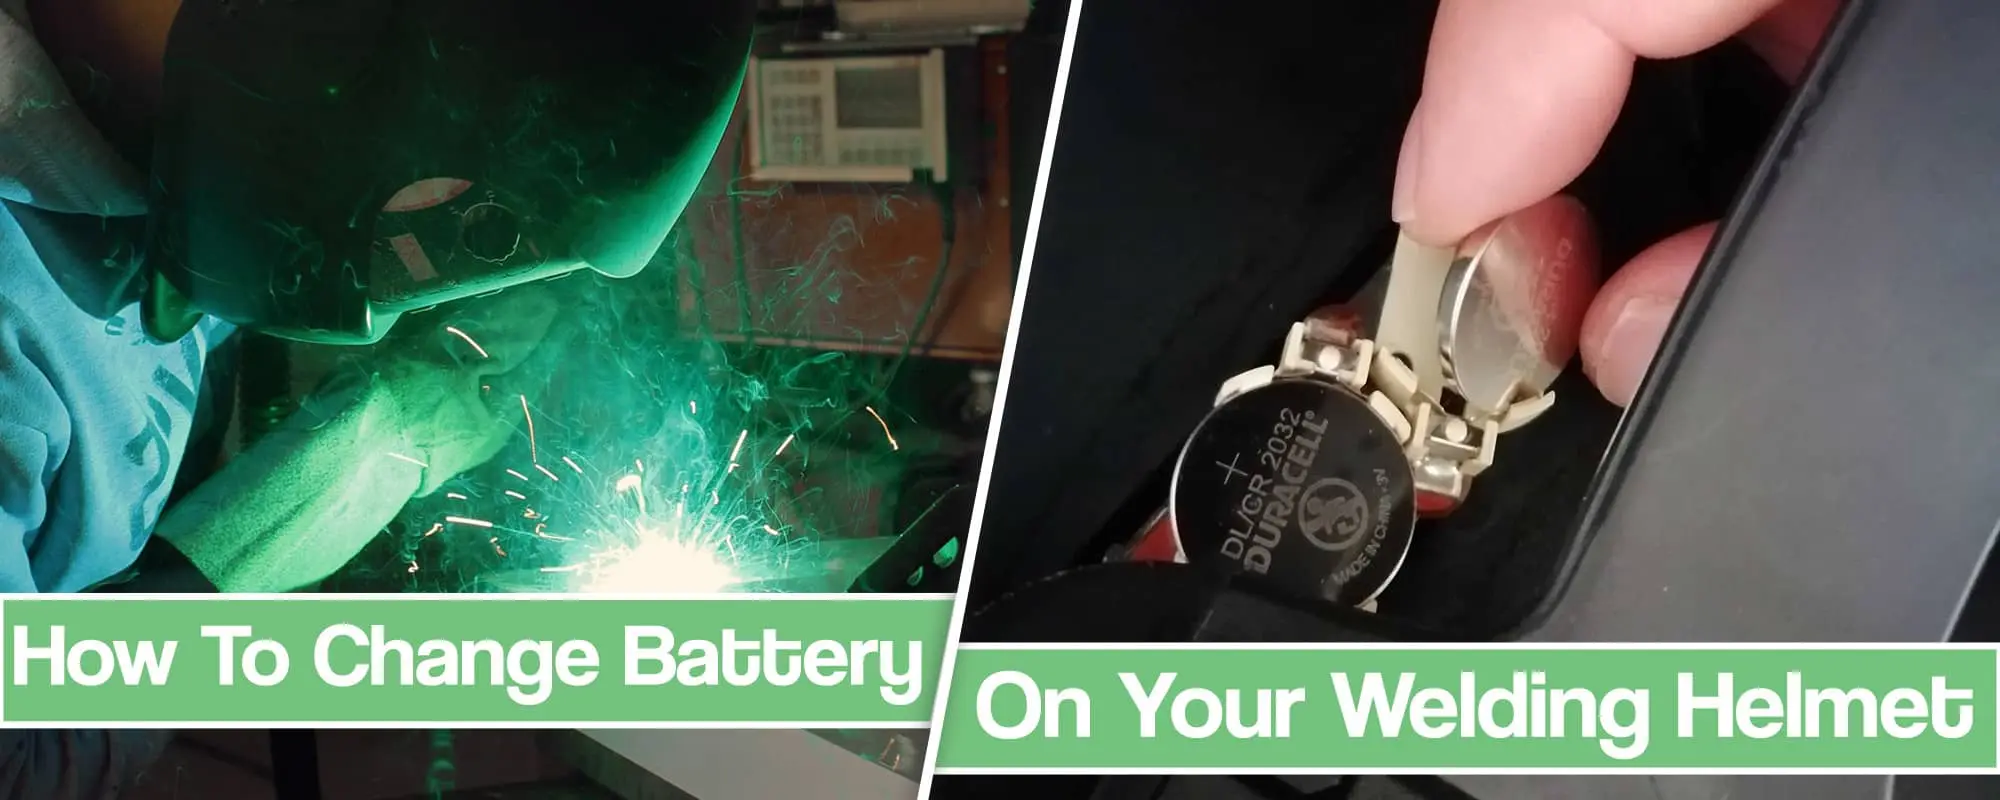 How To Change The Battery In Your Welding Helmet Replaceable or Not